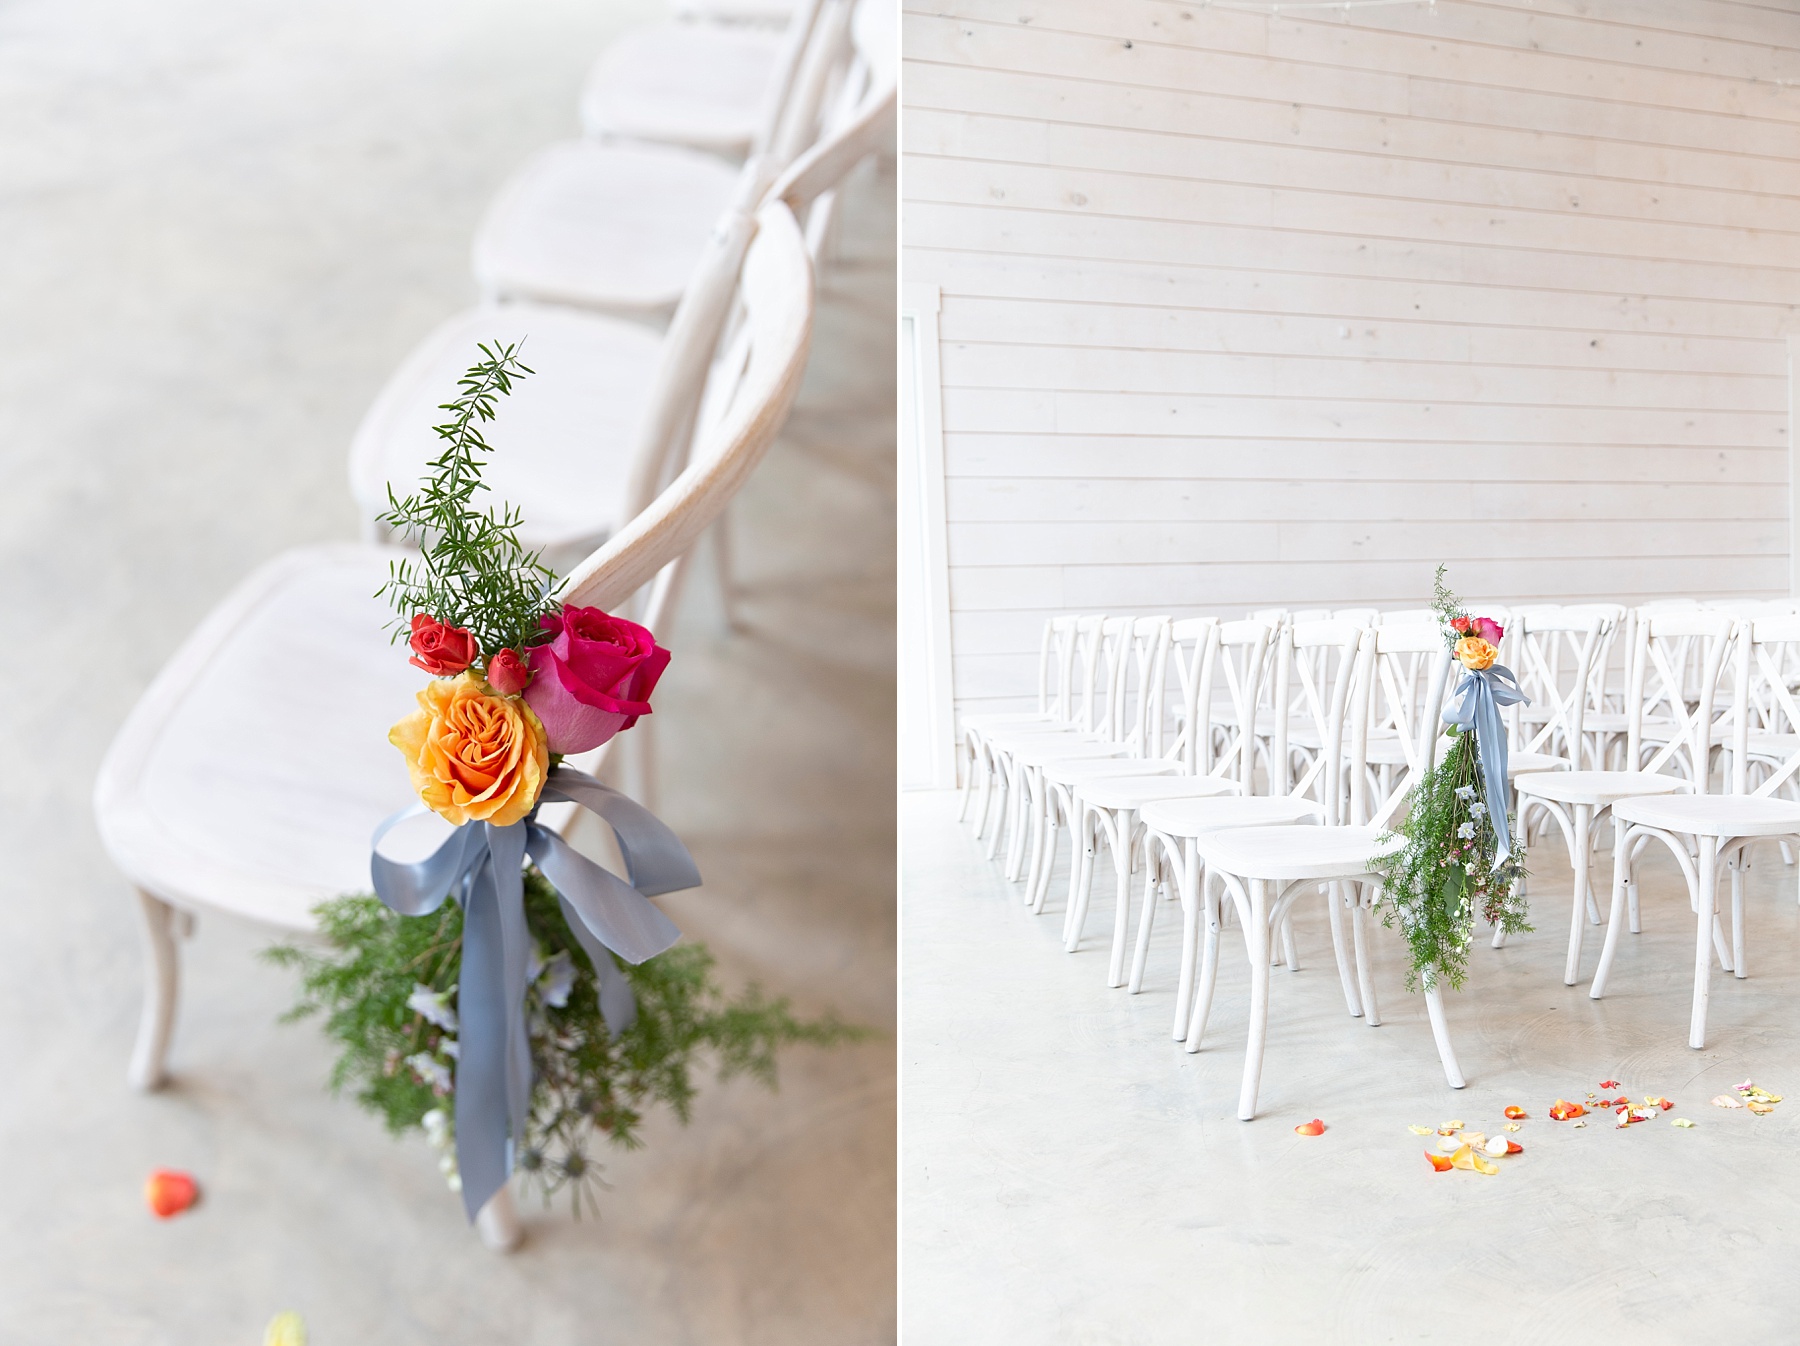 wedding ceremony floral details to mark first row photographed by Randi Michelle Weddings